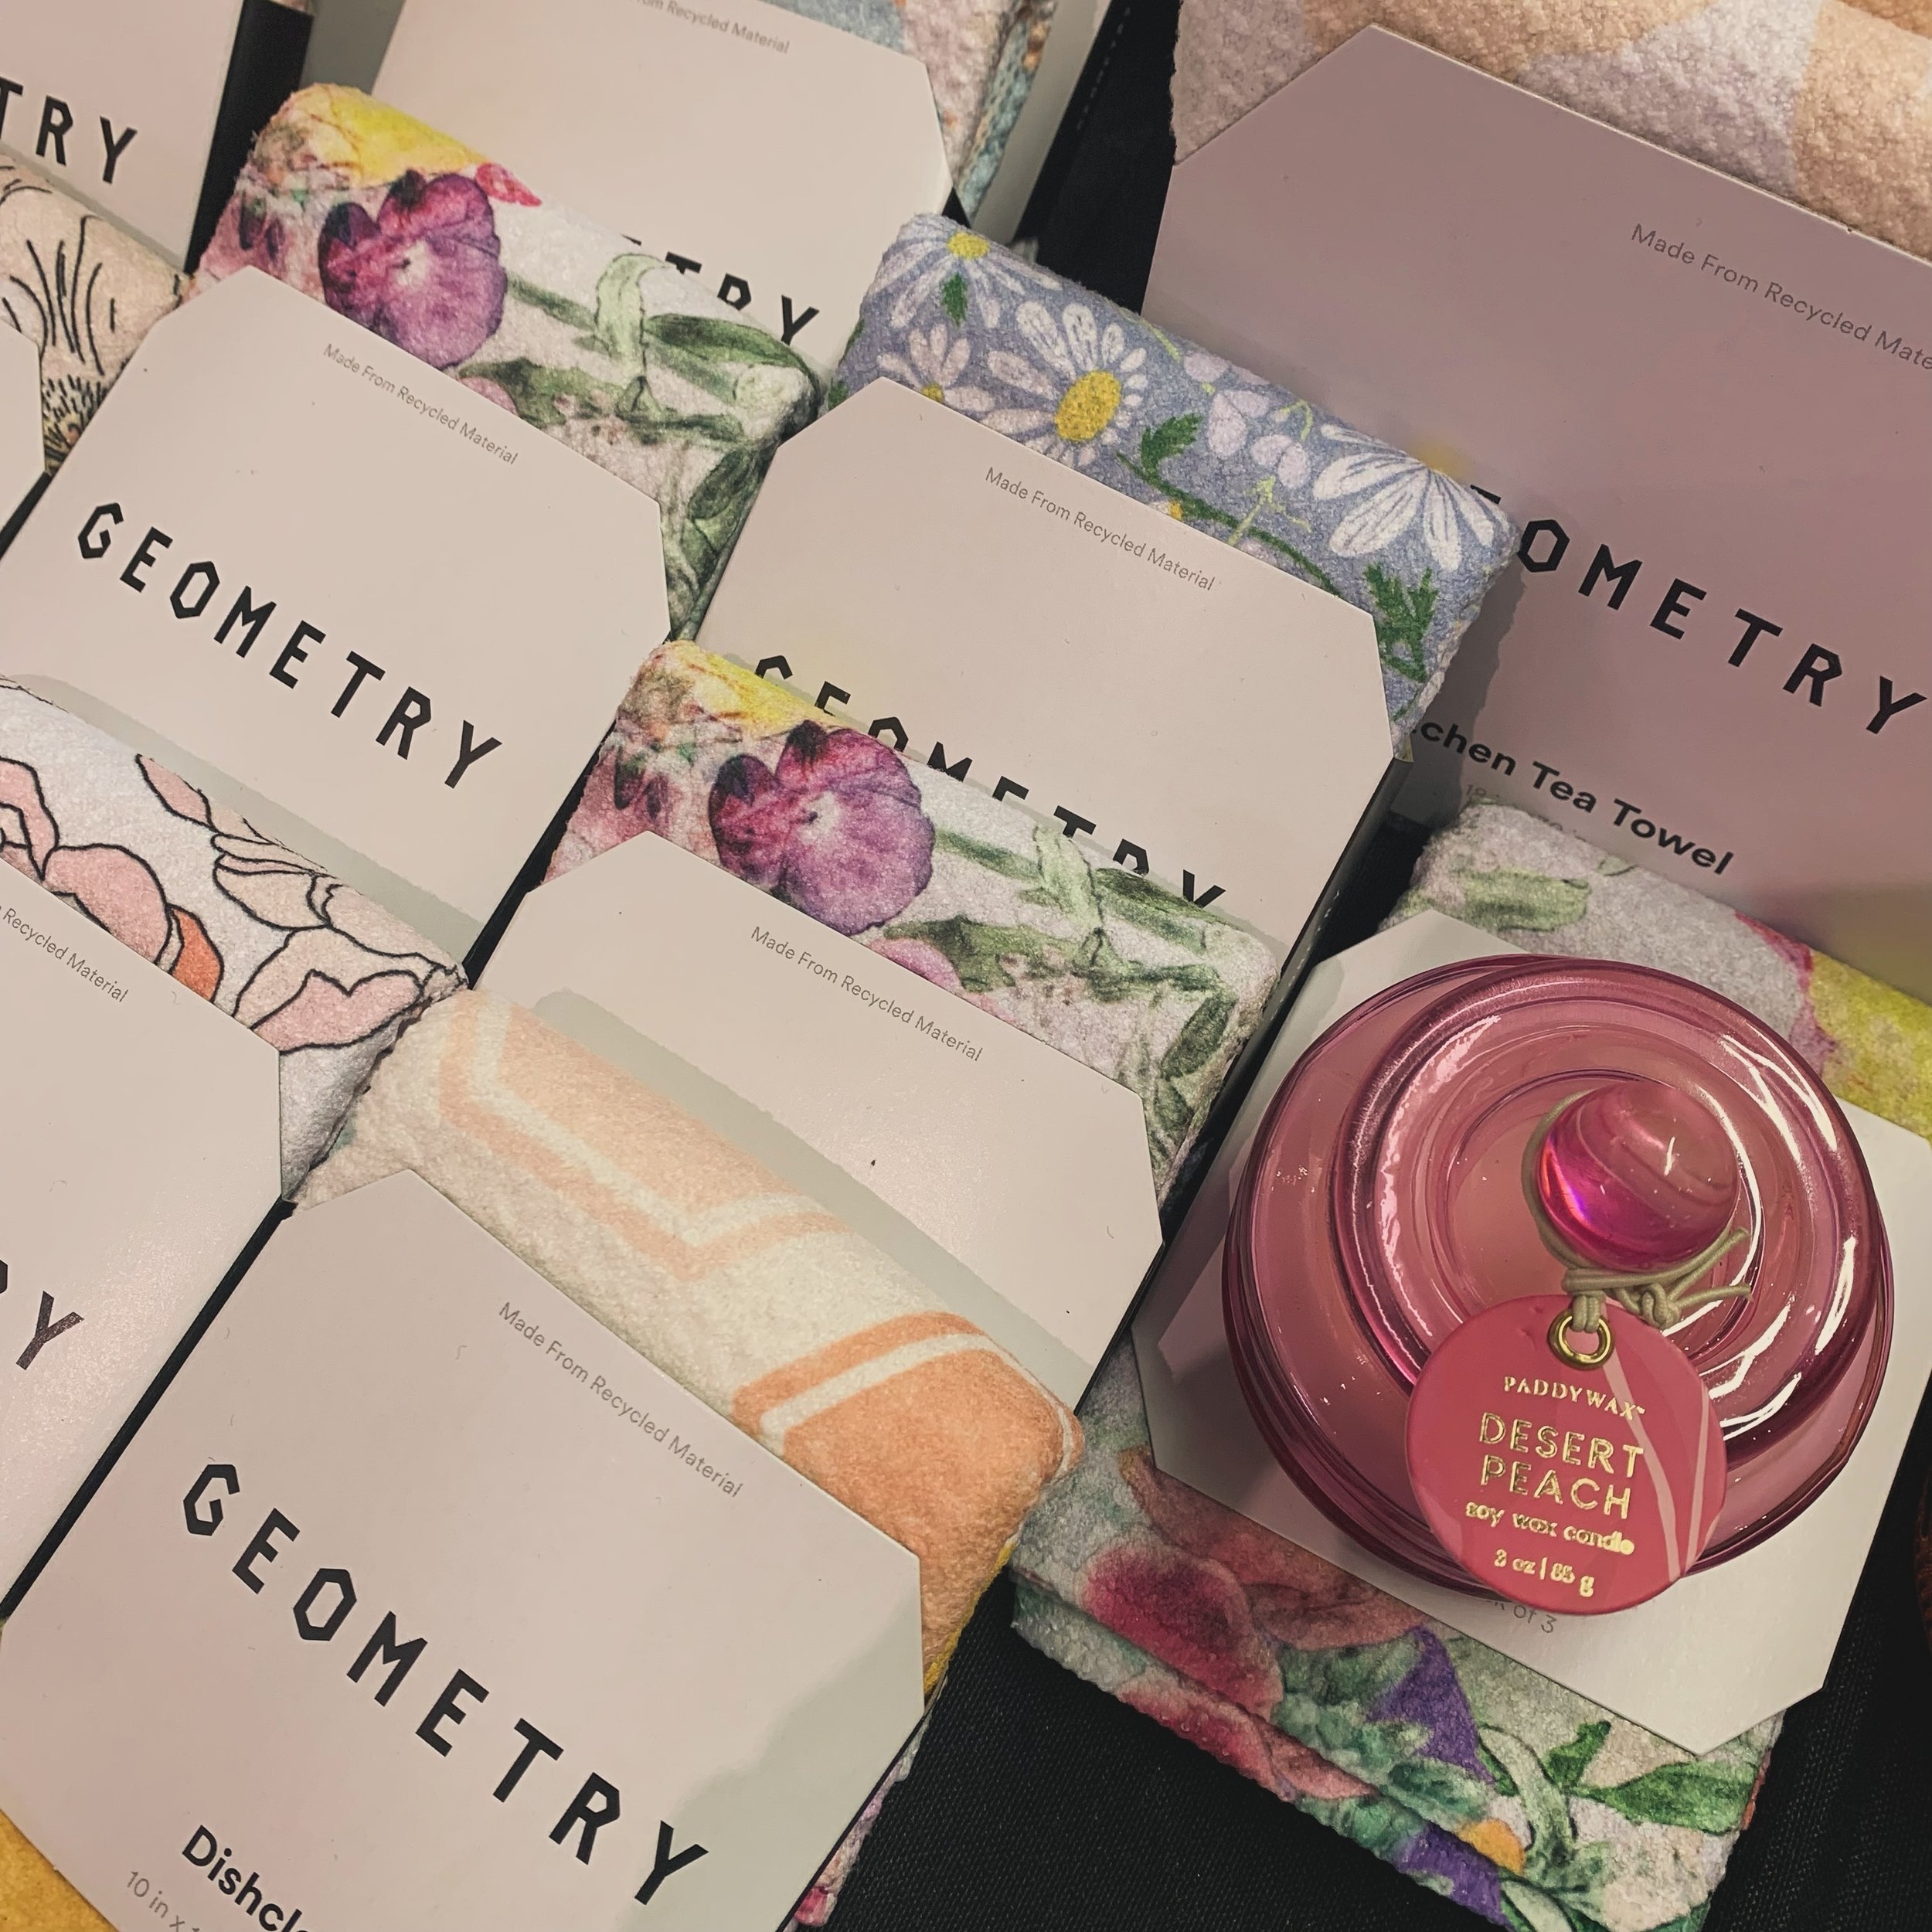 Here&rsquo;s a gift idea for moms, nurses, and teachers! 

Pair a gorgeous Geometry towel with a delicious smelling candle. Easy, efficient&hellip;it&rsquo;s a win all around!